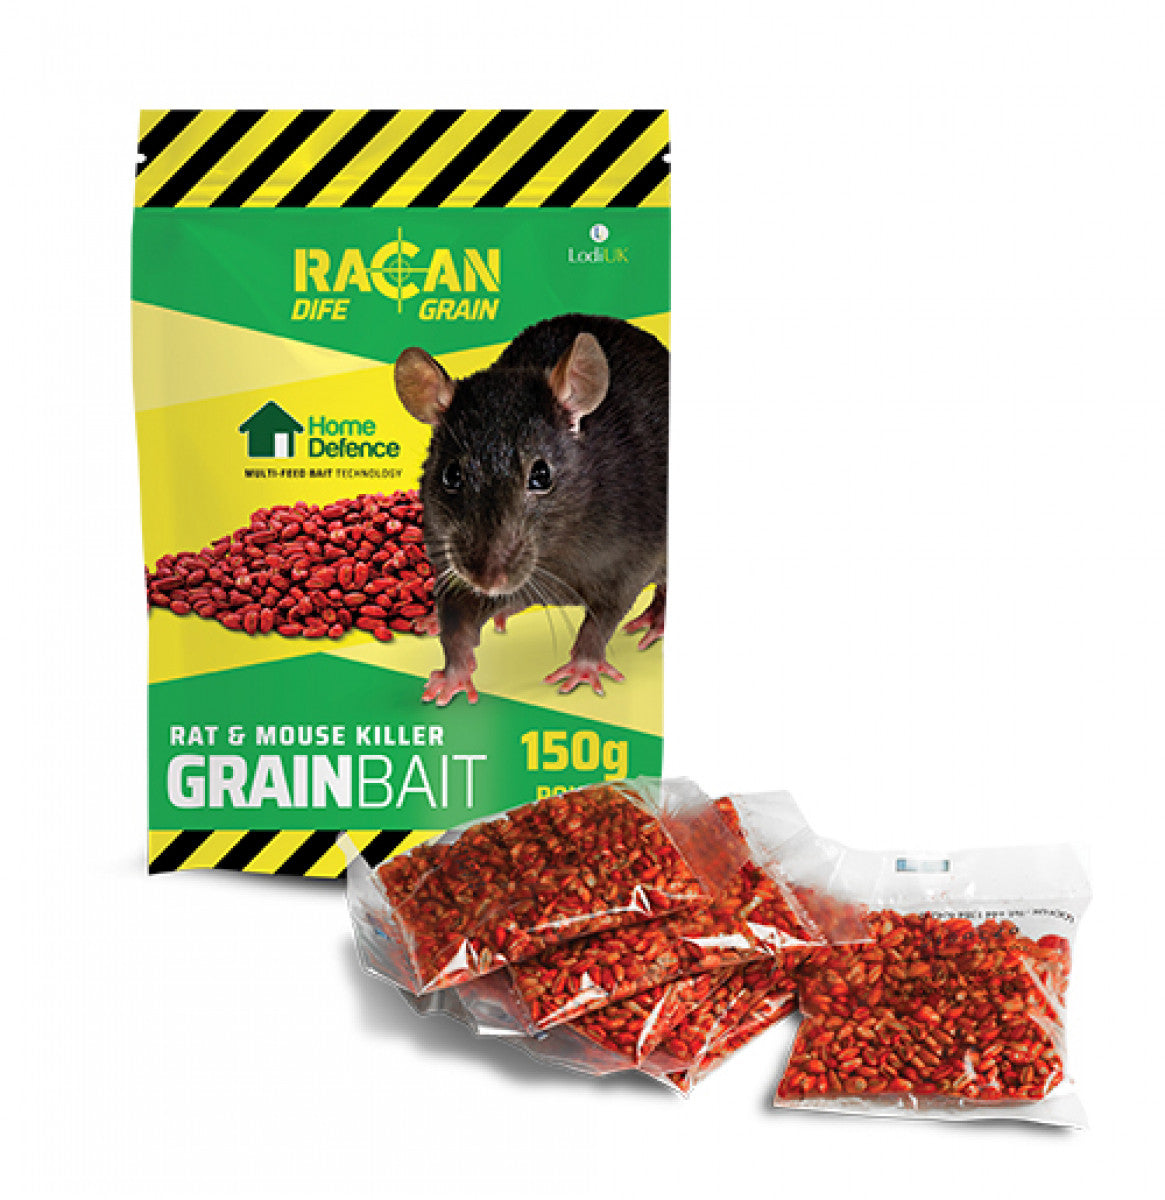 Racan Dife Grain Rat Poison Strongest Available 150g Grain Pack ( Pack of 10/20/30/40/50) - Moth Control